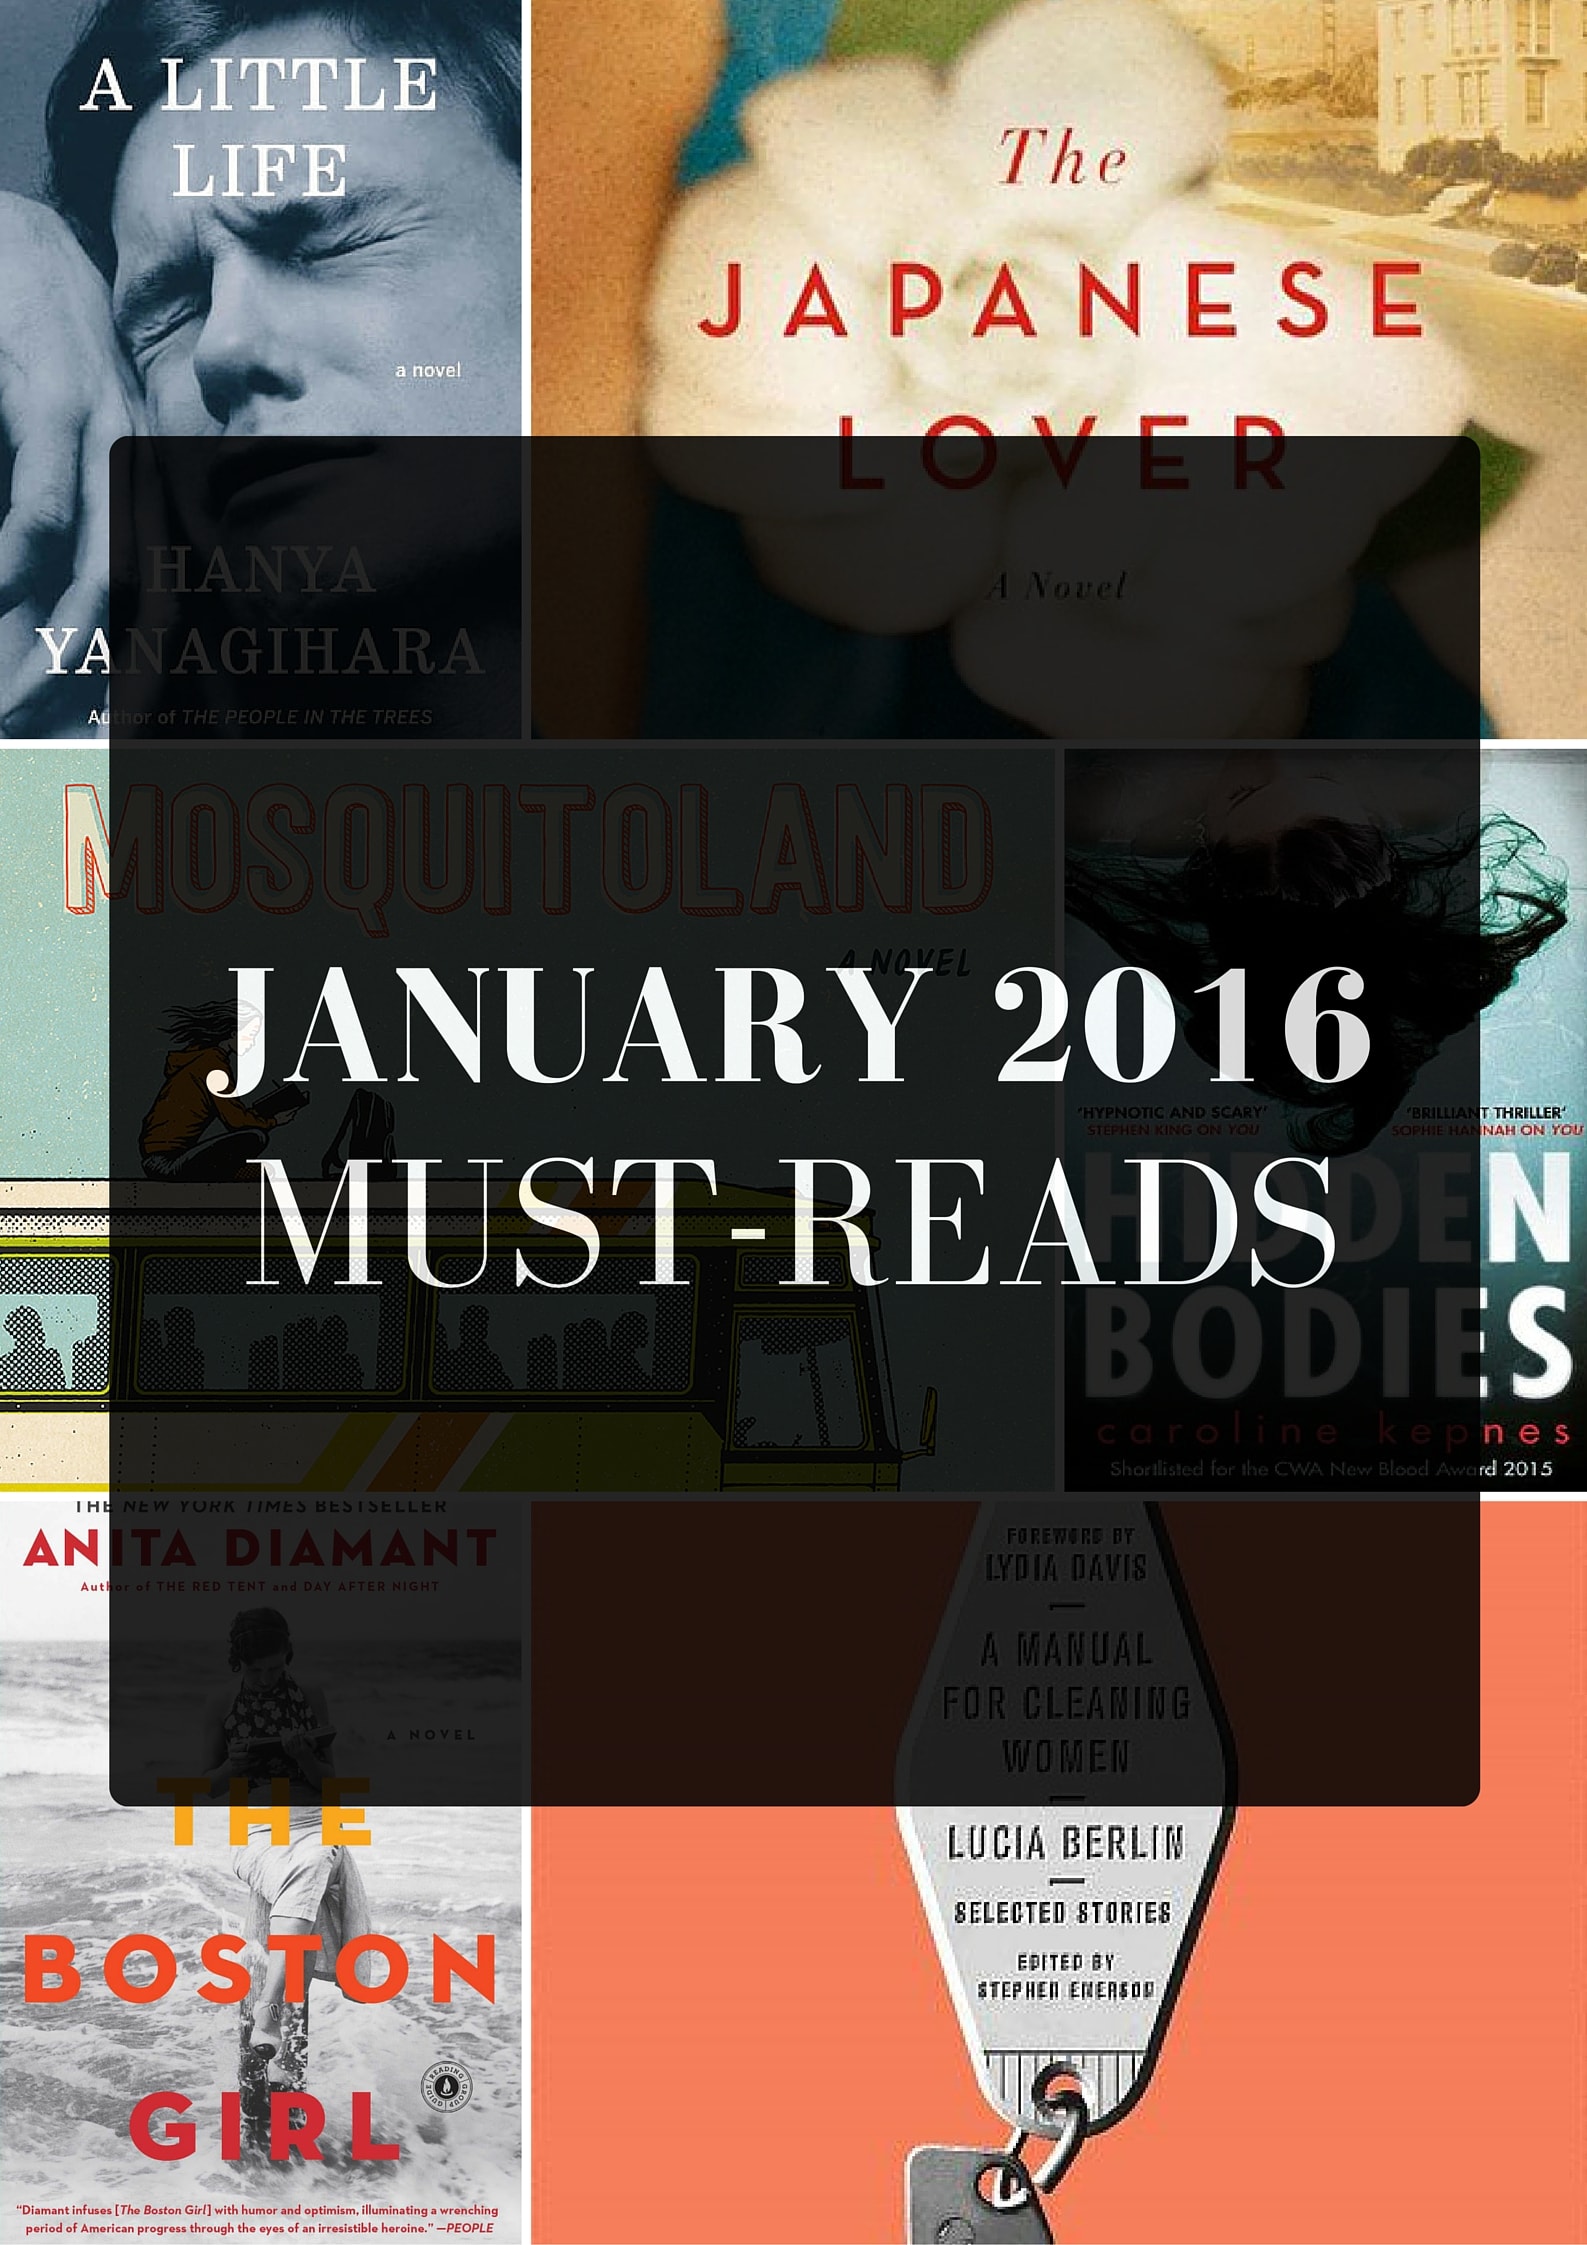 January 2016 Must-Reads from MomAdvice.com